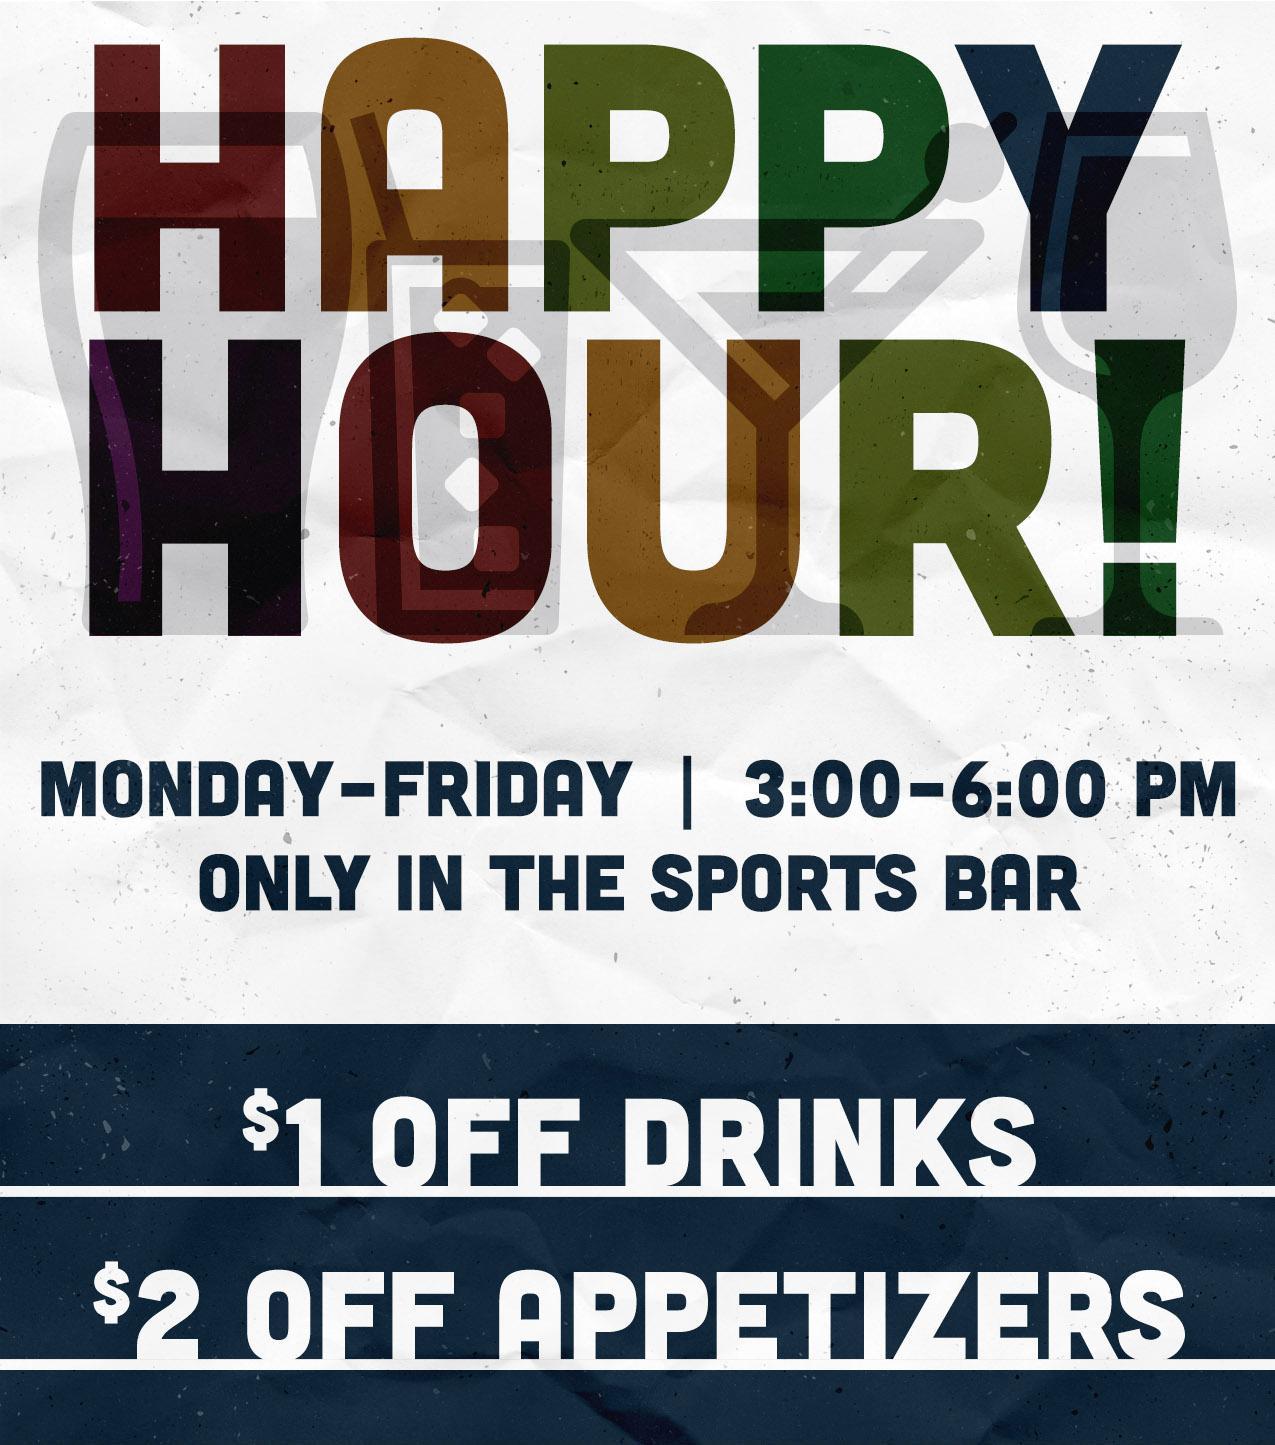 See You at Happy Hour!